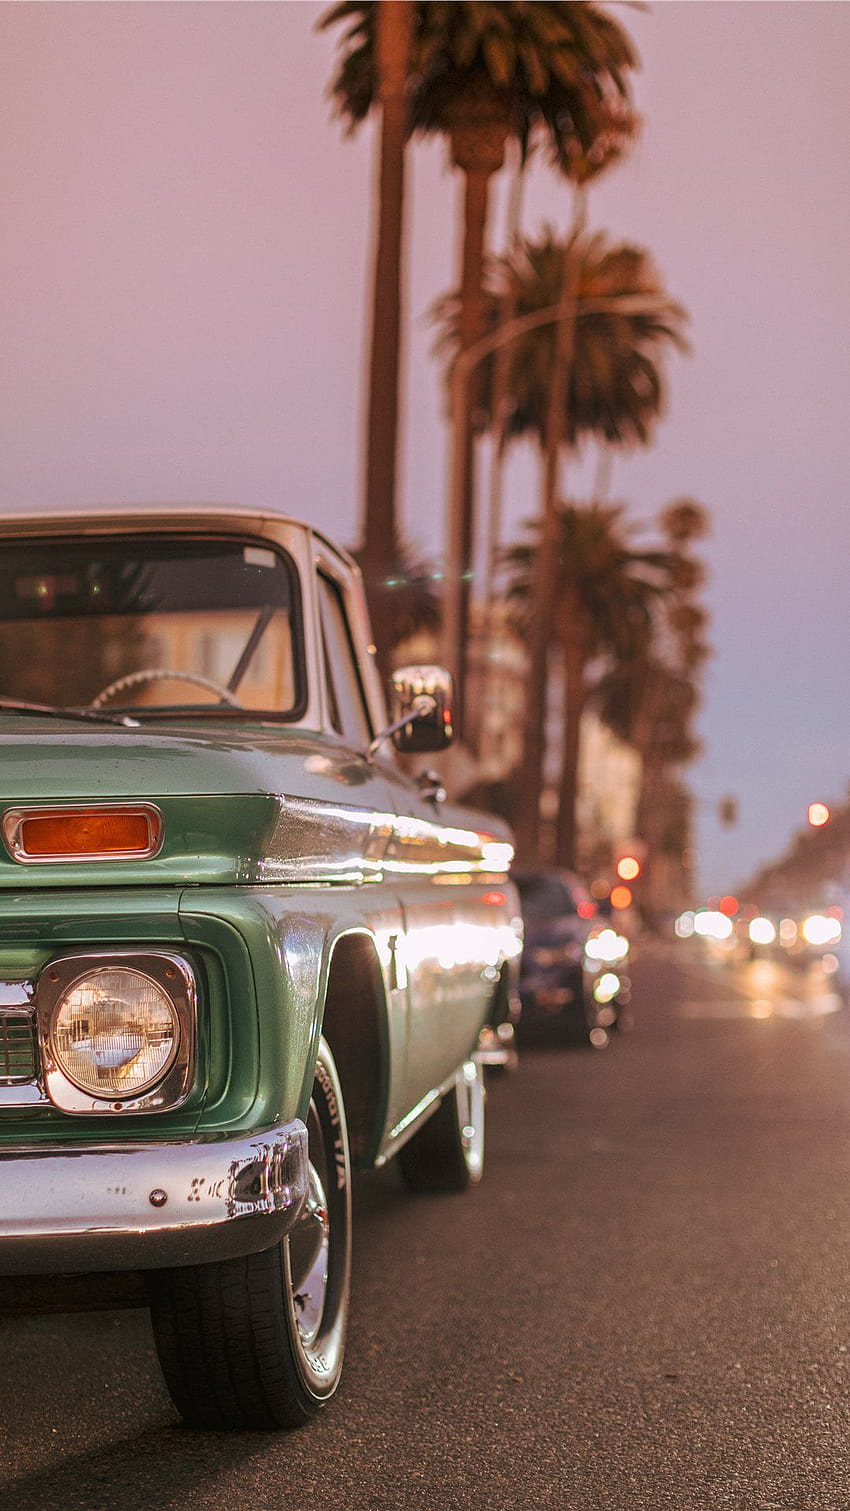 Vintage car parked on Ocean Blvd during sunset iPhone 8, retro sunset aesthetic HD phone wallpaper